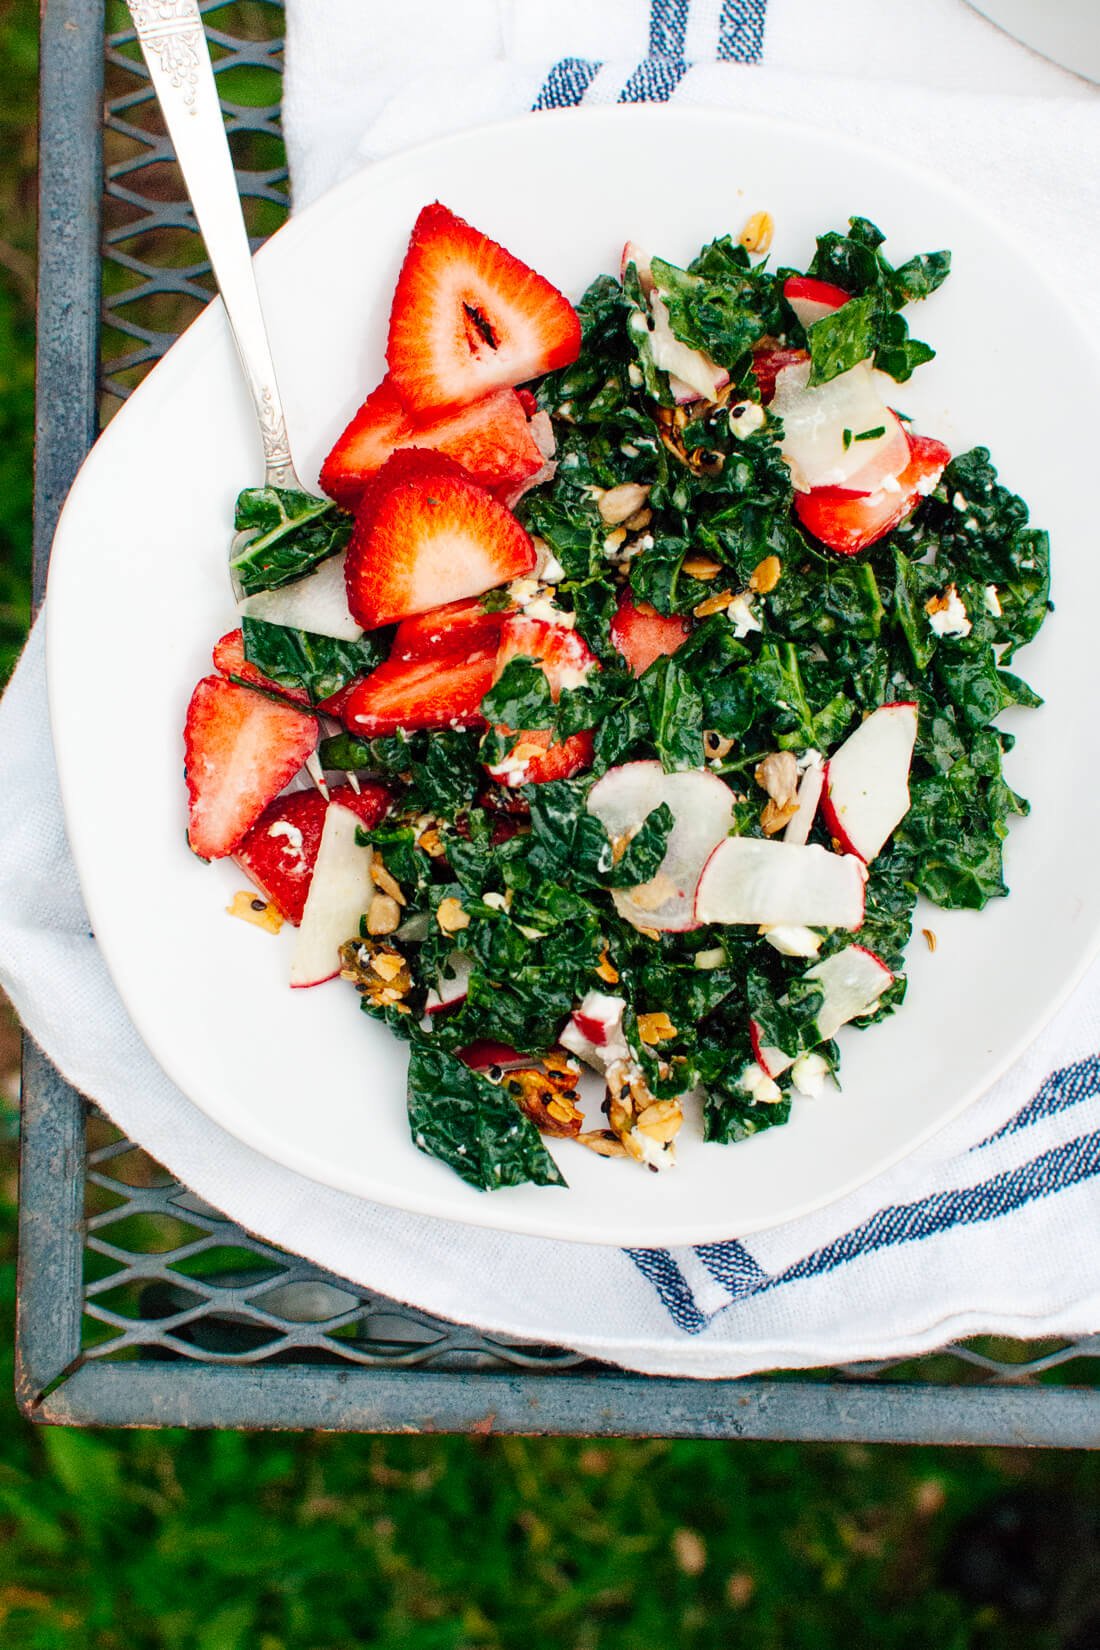 Strawberry Kale Salad with Almond Granola Croutons